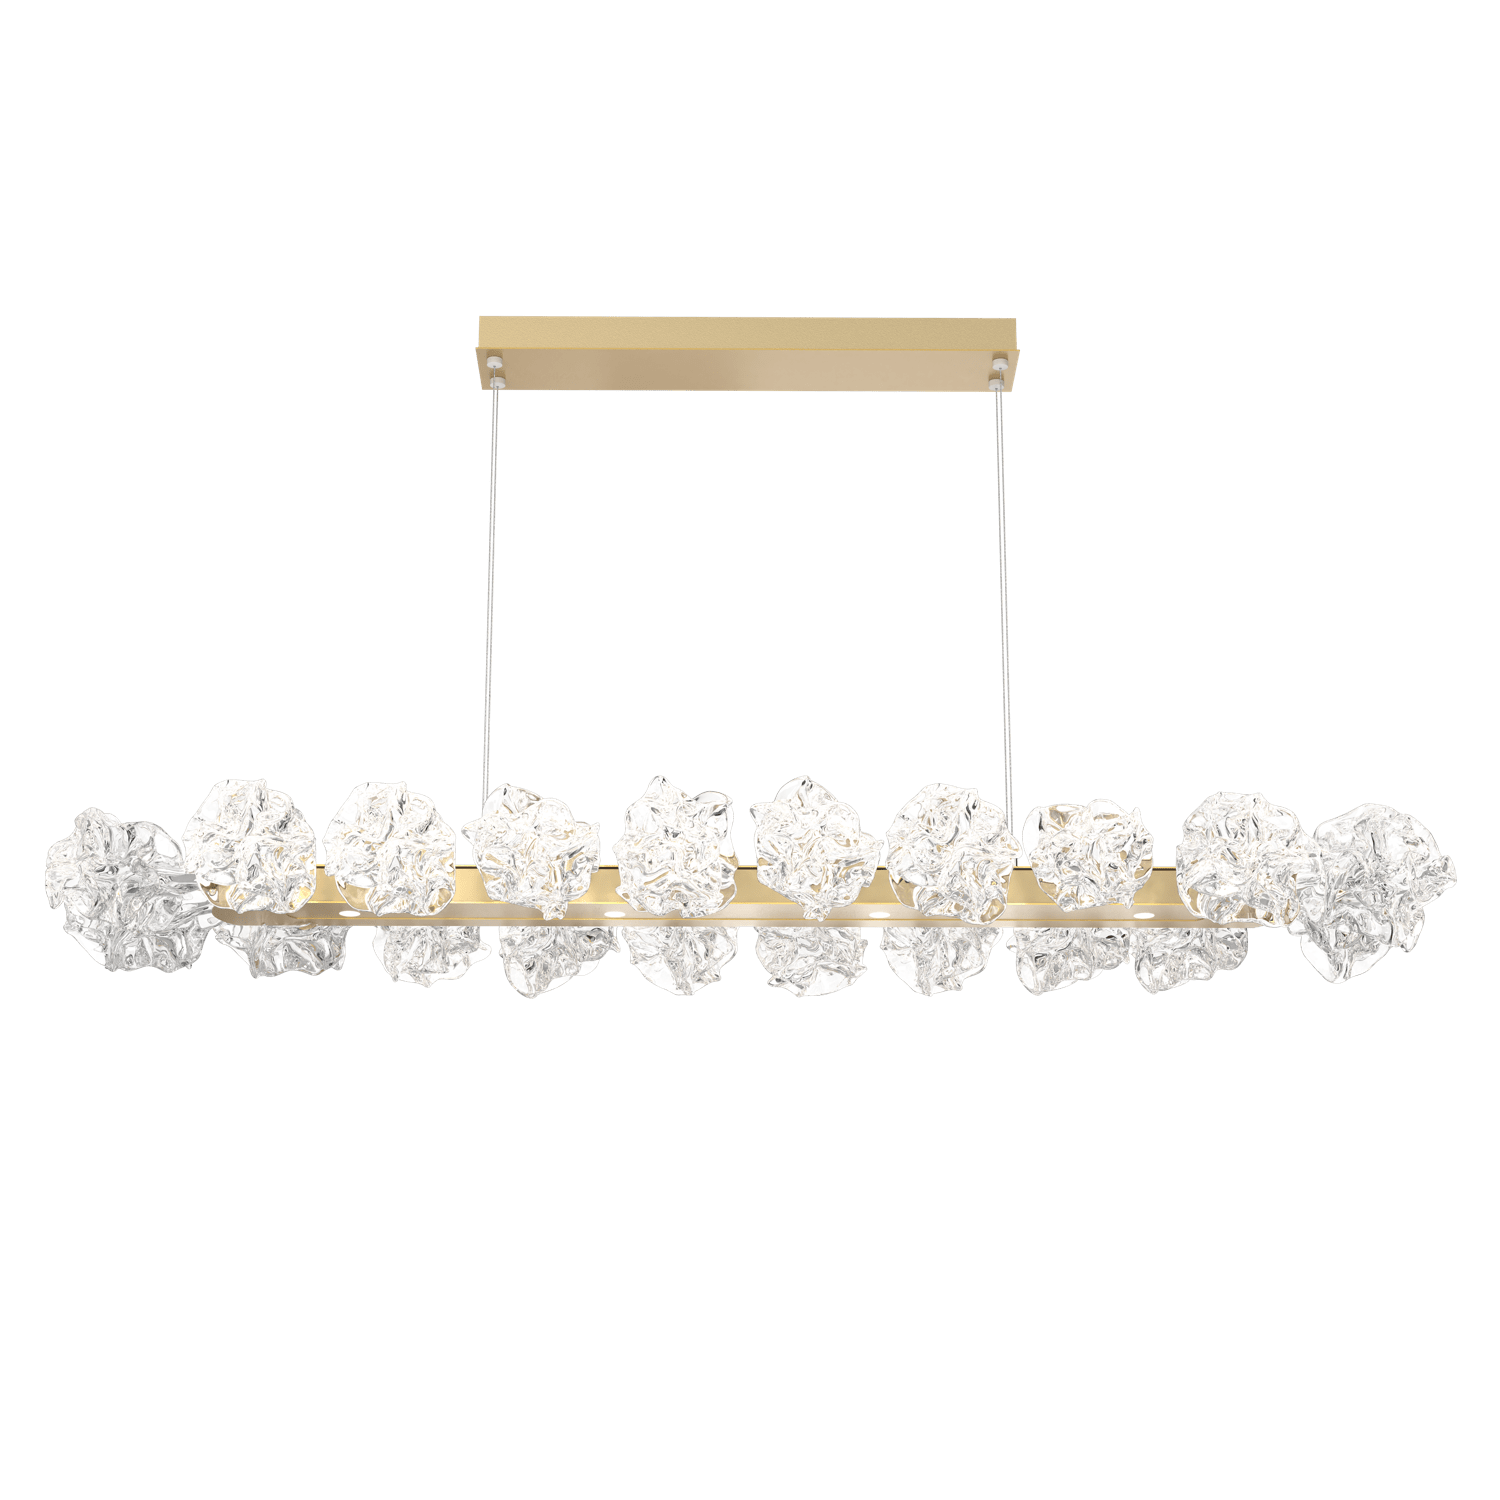 PLB0059-60-GB-Hammerton-Studio-Blossom-60-inch-linear-chandelier-with-gilded-brass-finish-and-clear-handblown-crystal-glass-shades-and-LED-lamping